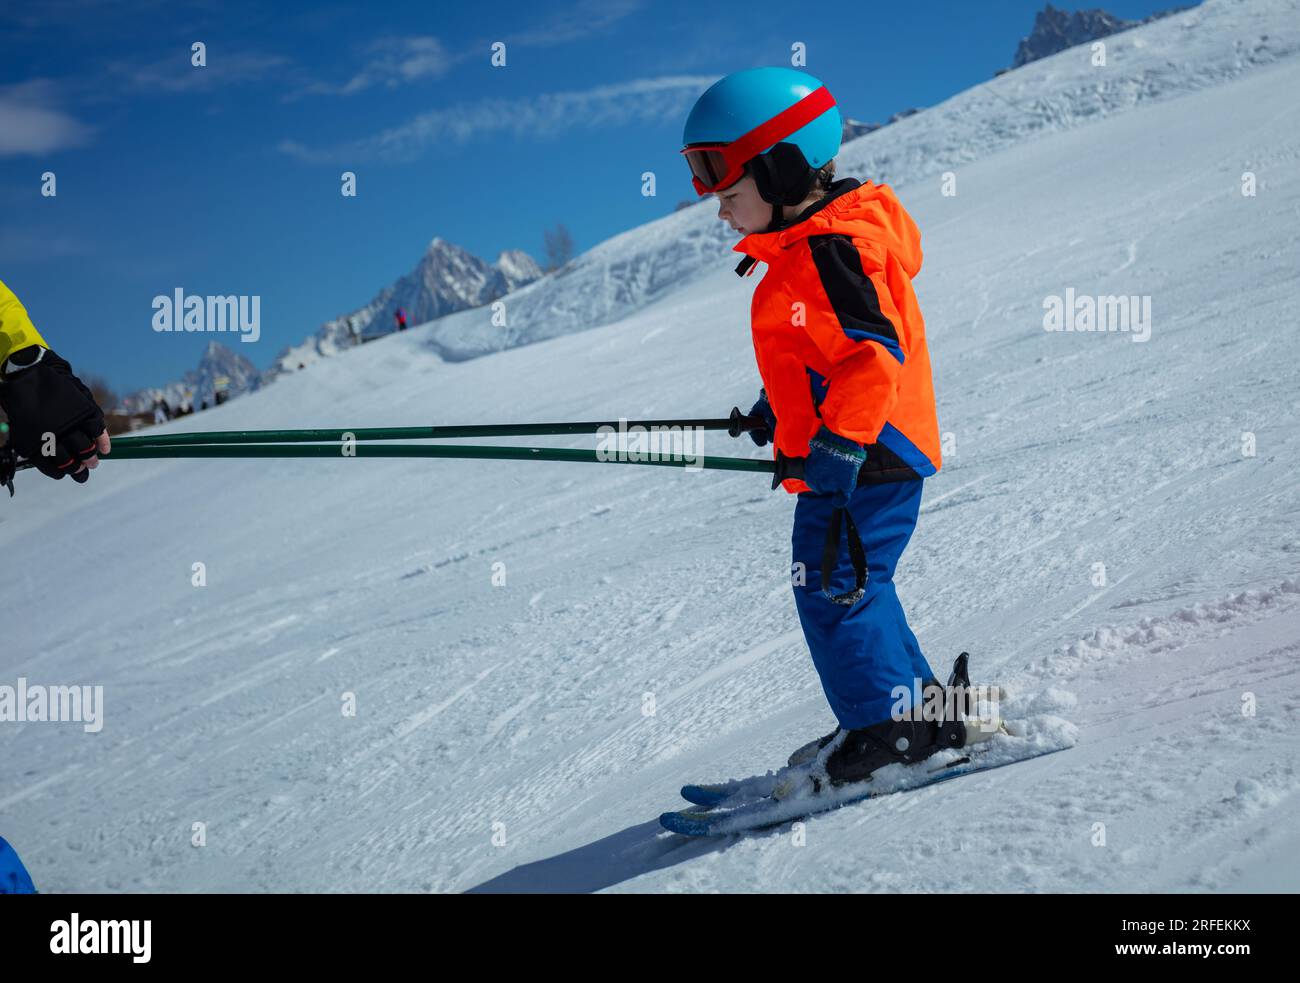 Profile view of child learn to ski with instructor holding poles Stock Photo